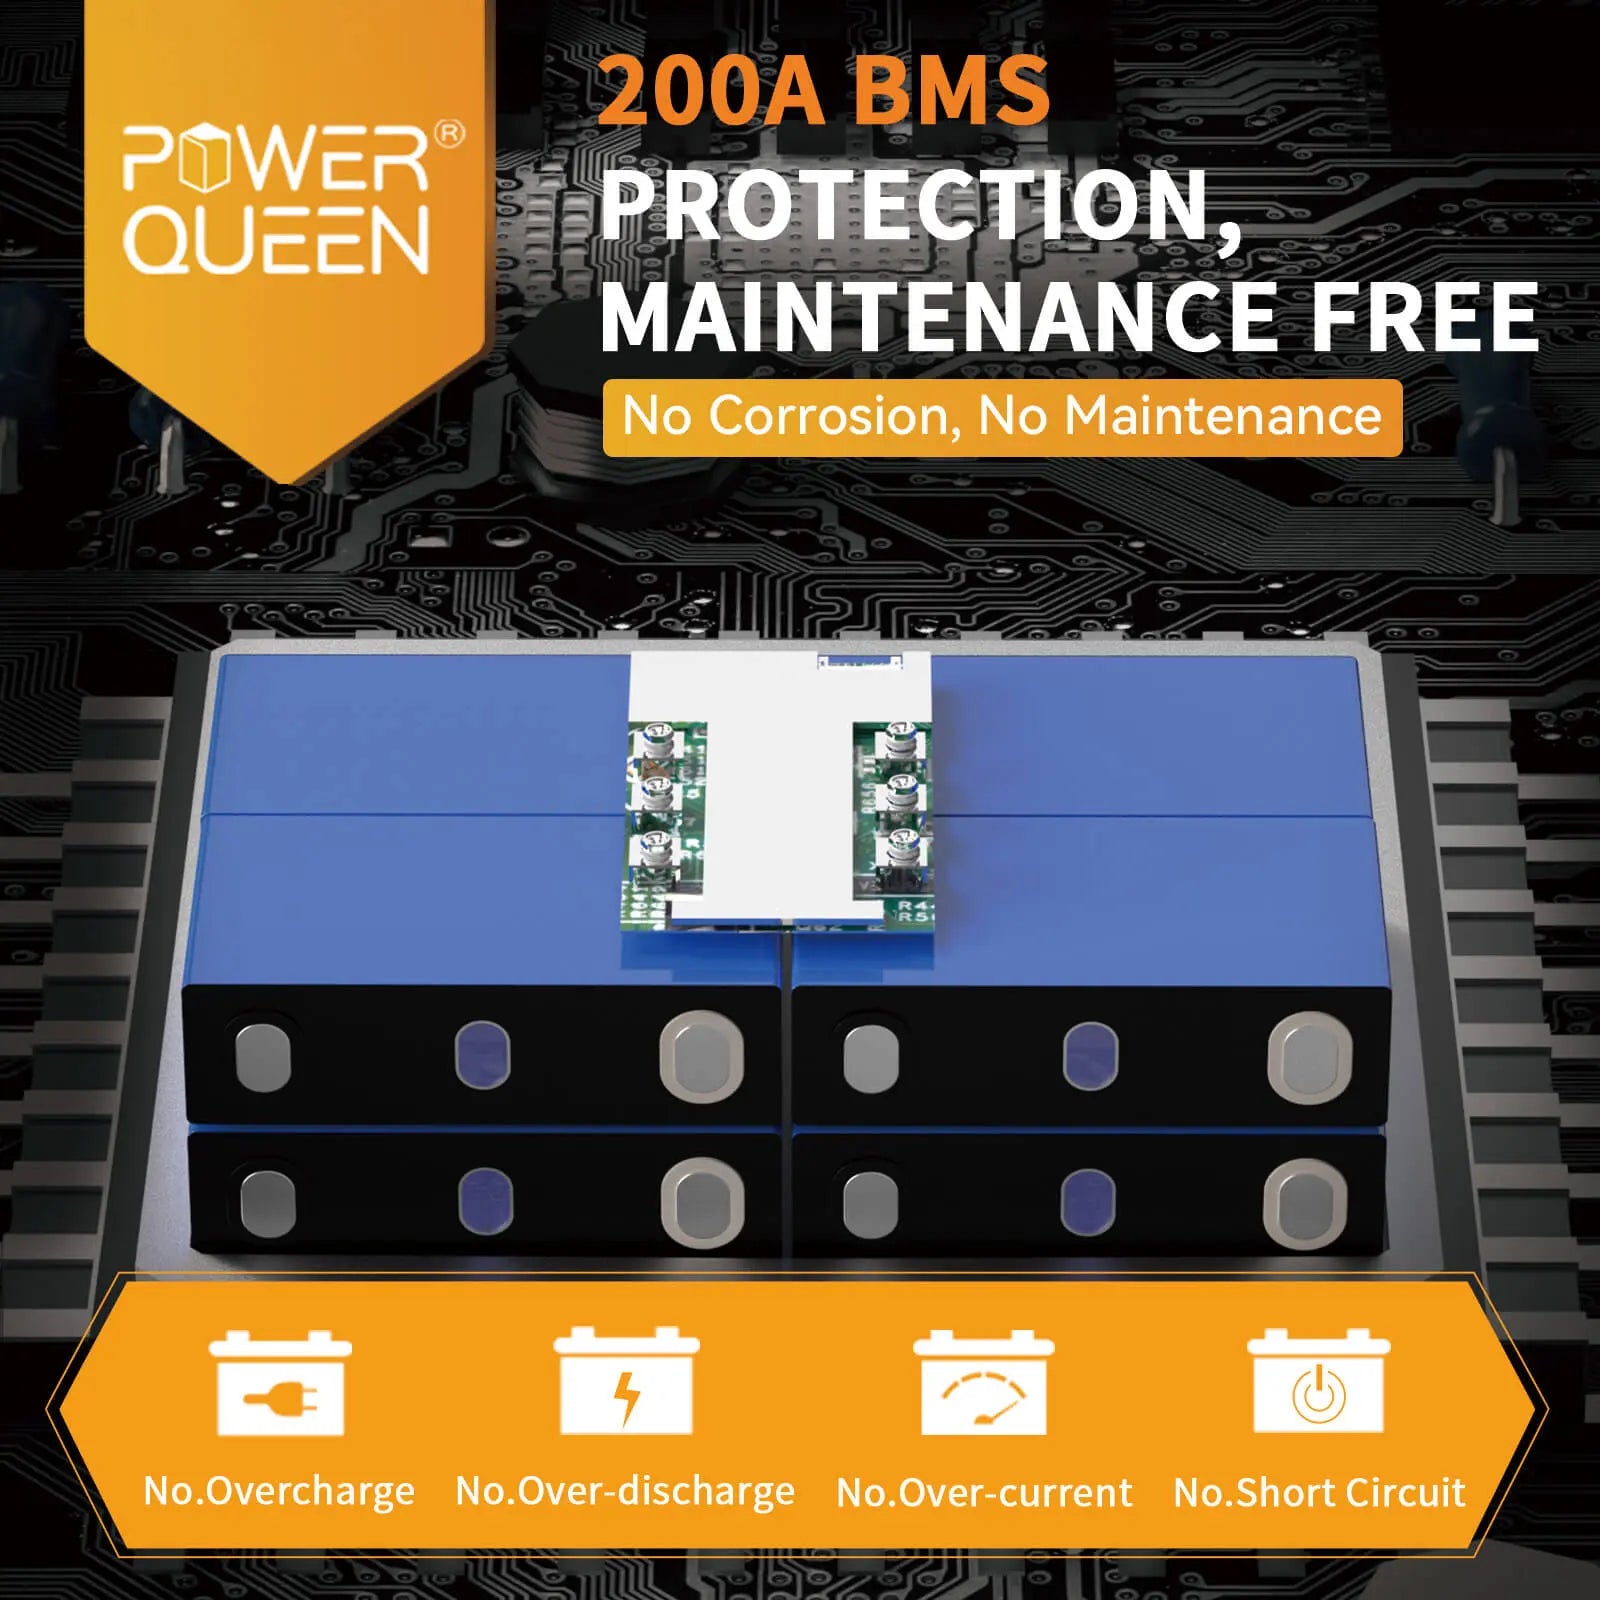 Power Queen 12.8V 300Ah LiFePO4 Battery, Built-in 200A BMS